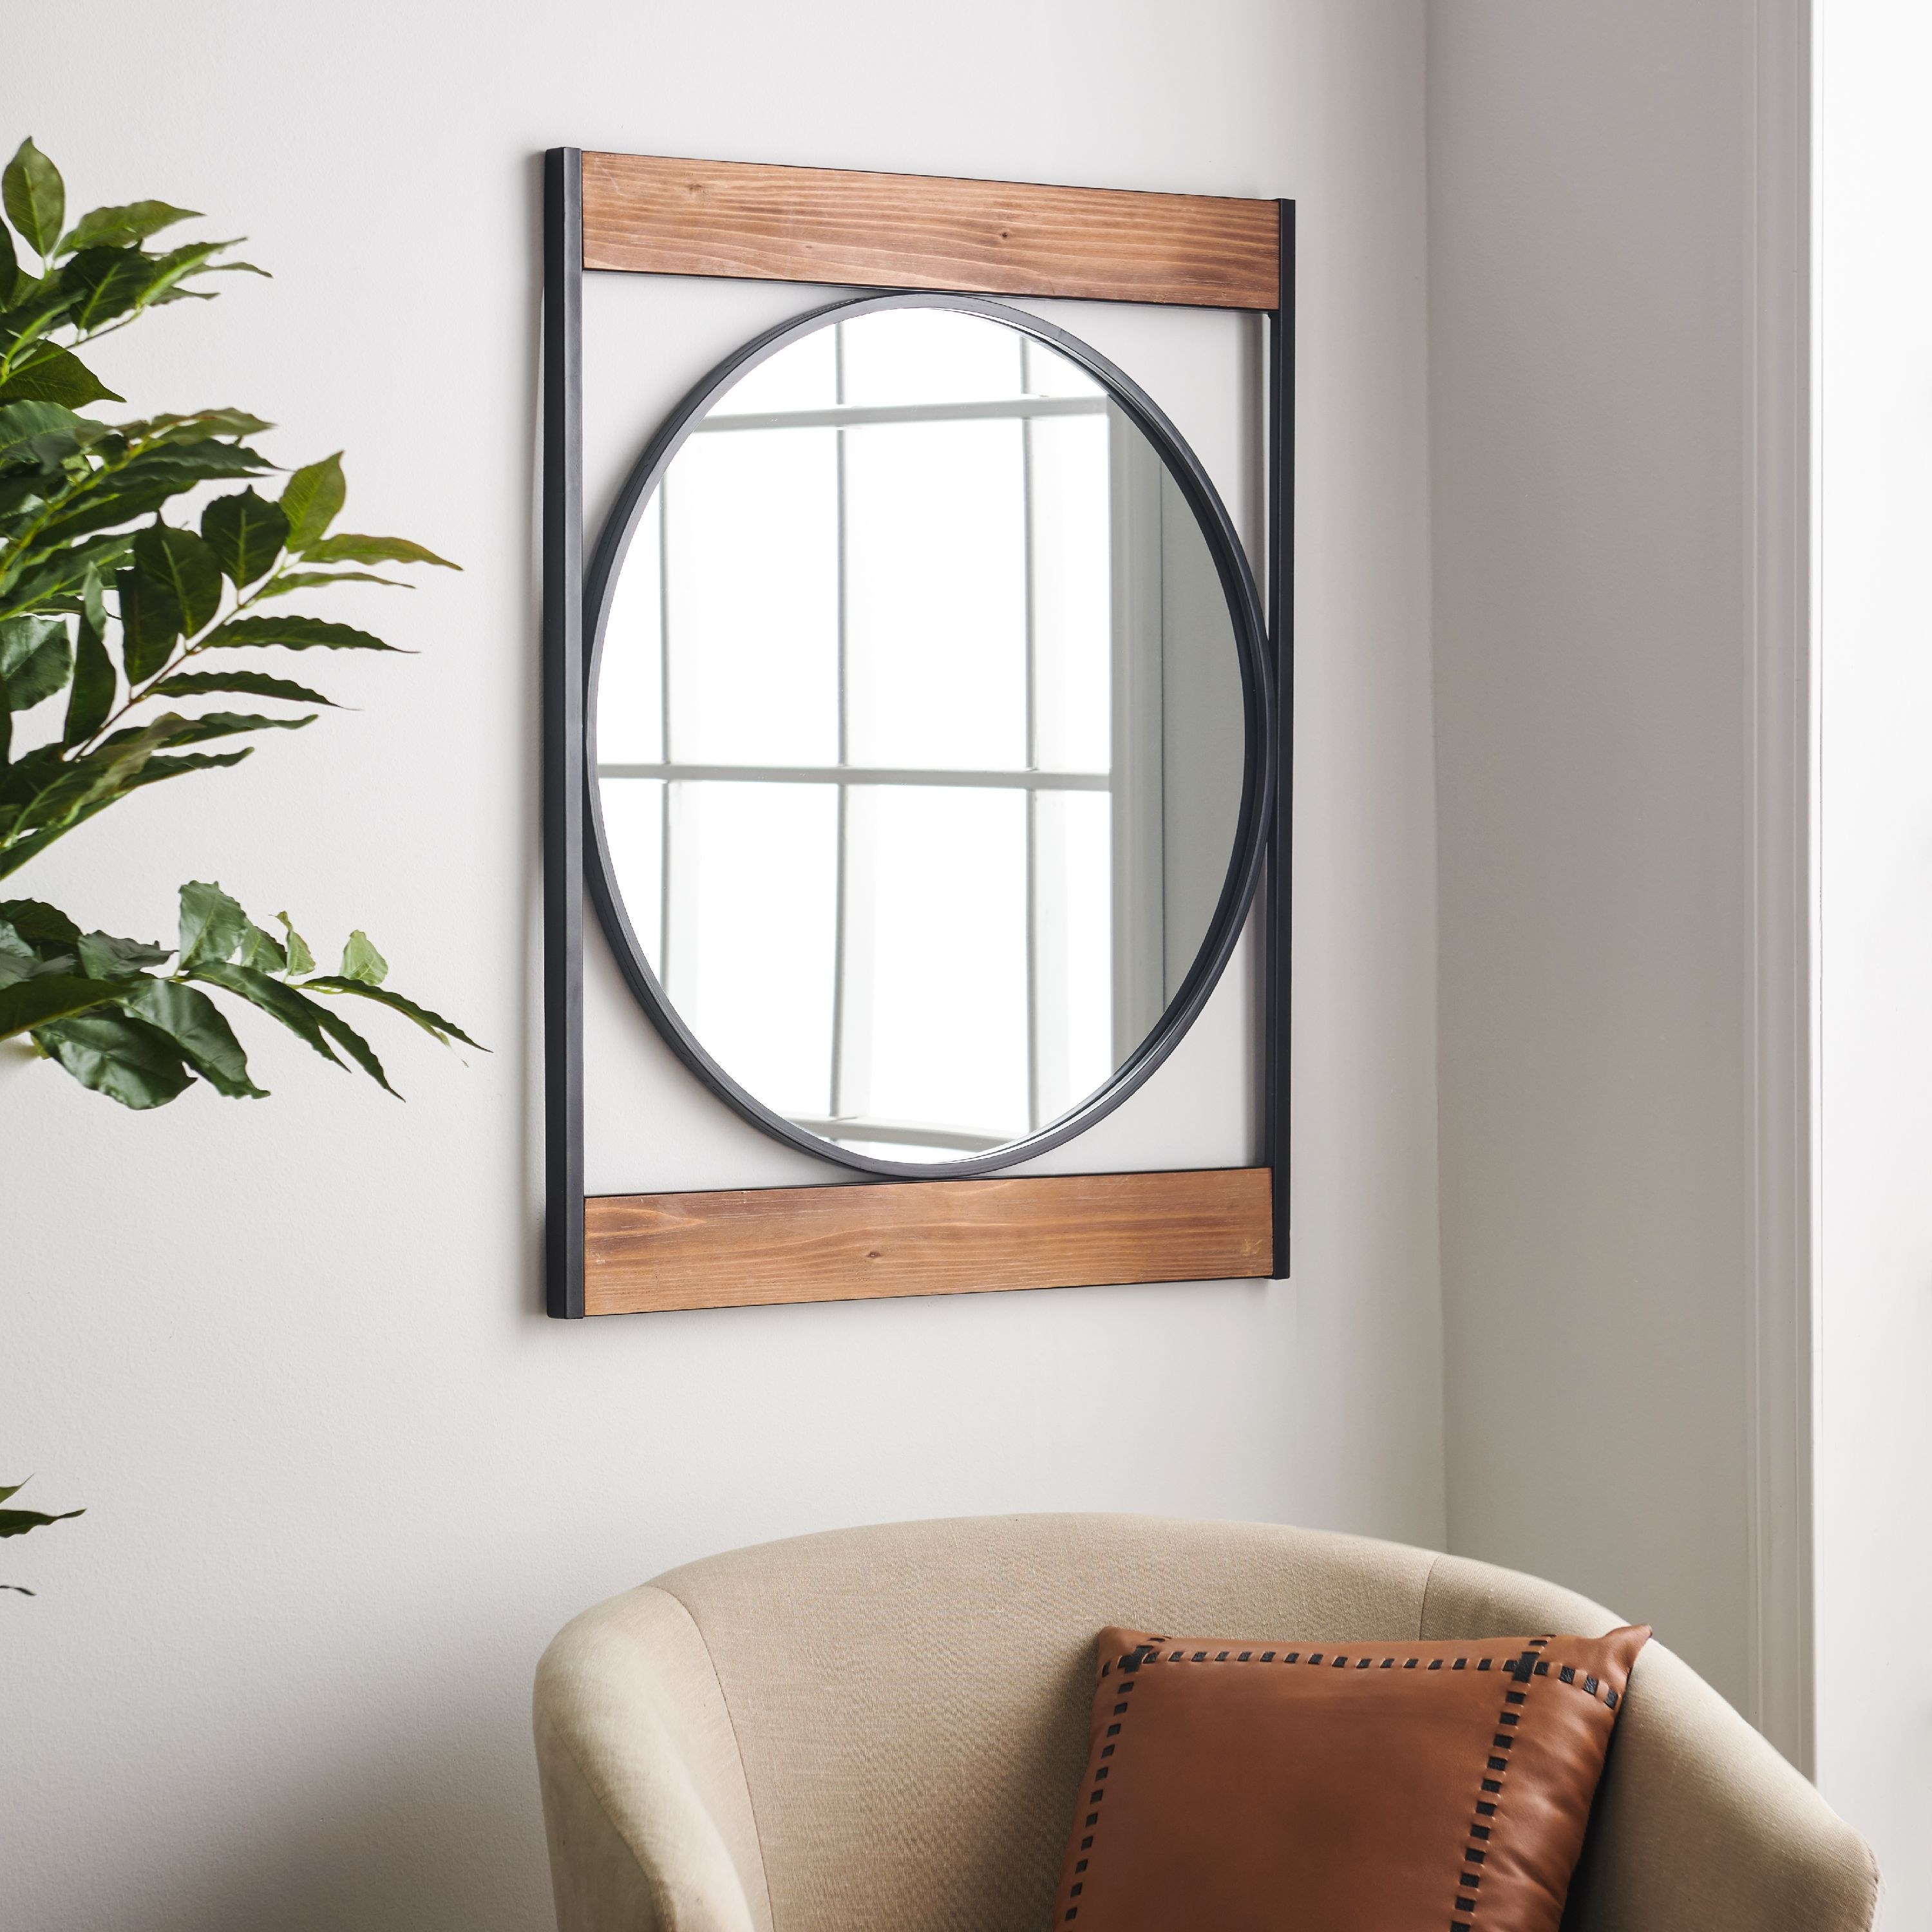 A round mirror with a square black metal frame 